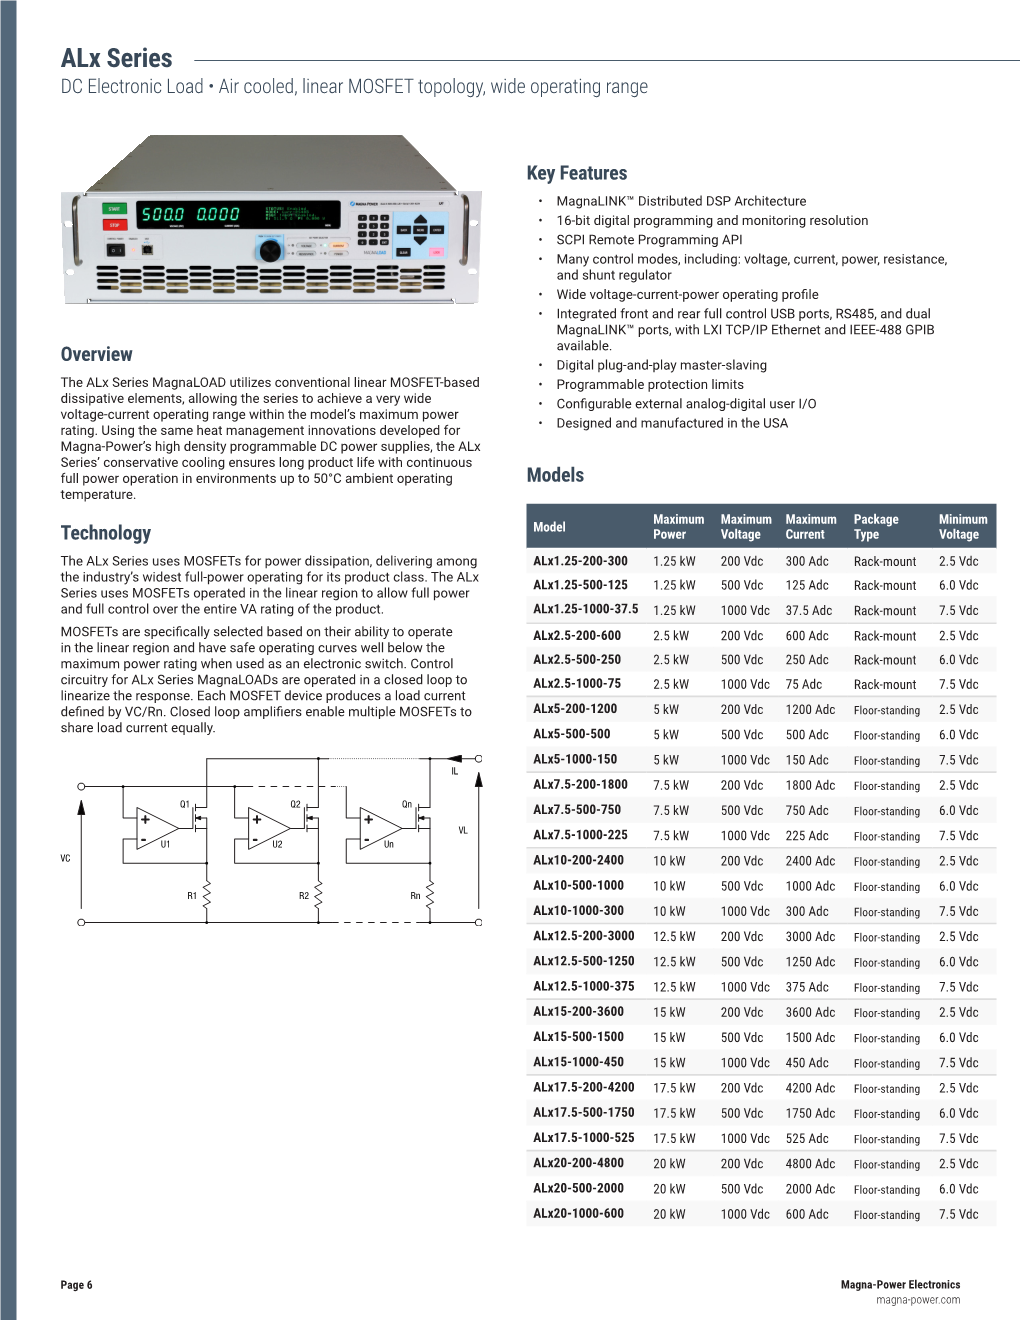 Alx Series DC Electronic Load • Air Cooled, Linear MOSFET Topology, Wide Operating Range